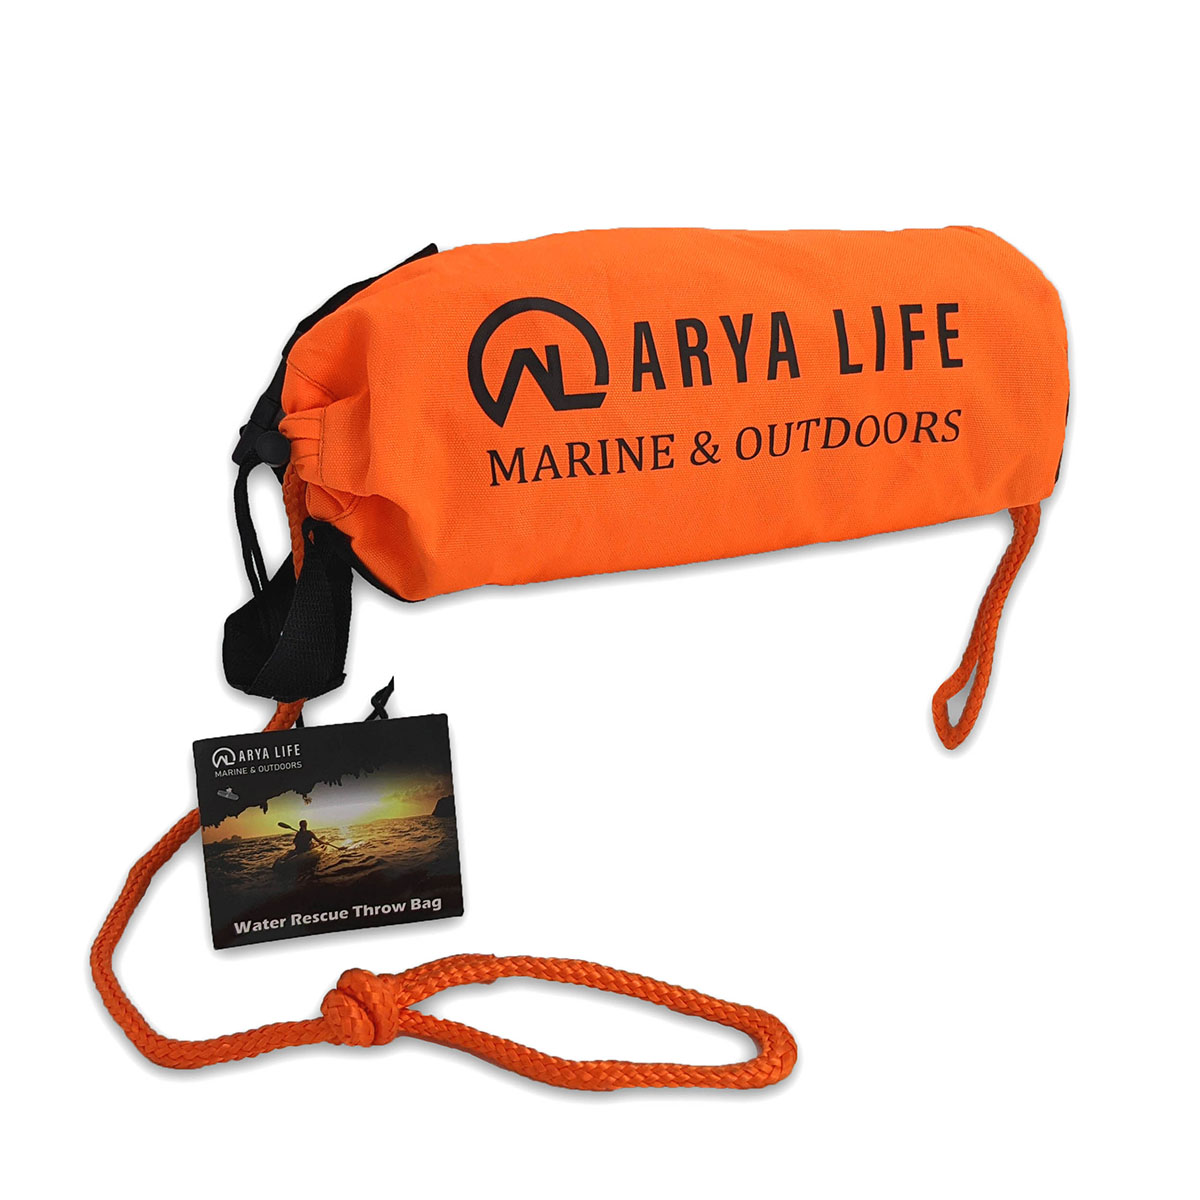 Arya Life Throw Rope Rescue Bag with 70ft of Marine Rope - High Visibility & Durable, Goodies N Stuff